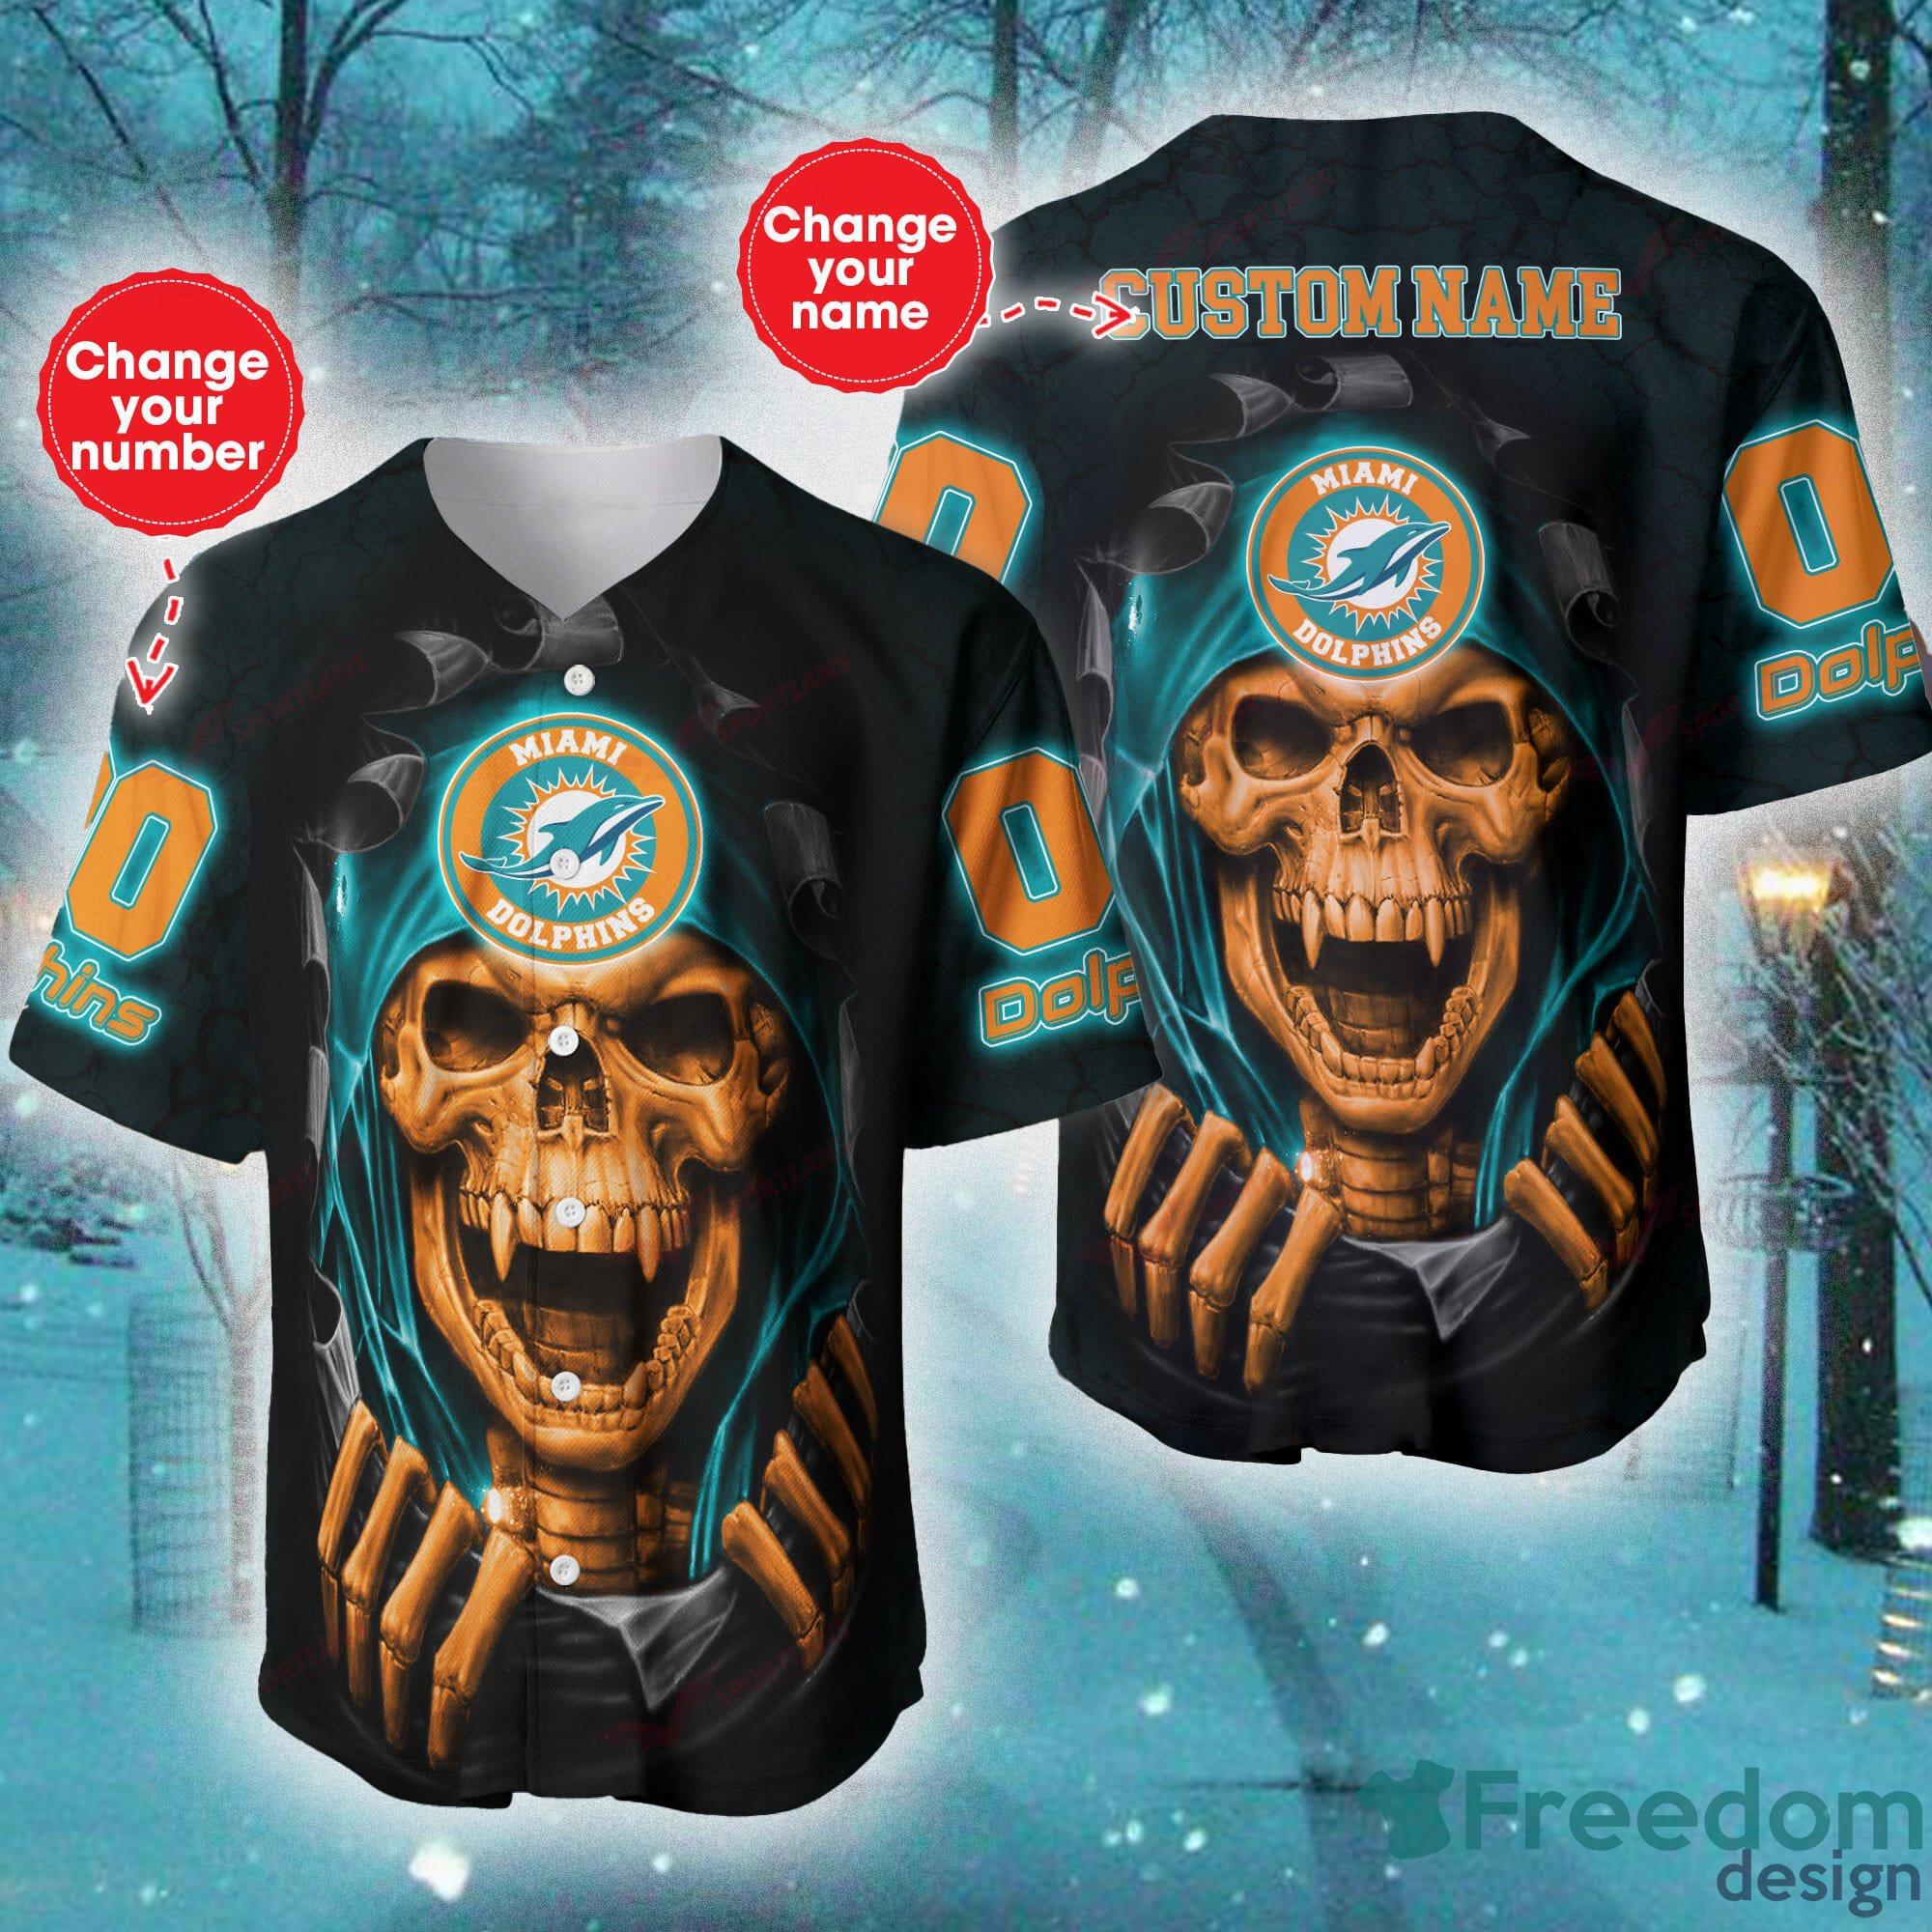 Miami Dolphins NFL Baseball Jersey Shirt Skull Custom Number And Name For  Fans Gift Halloween - Freedomdesign